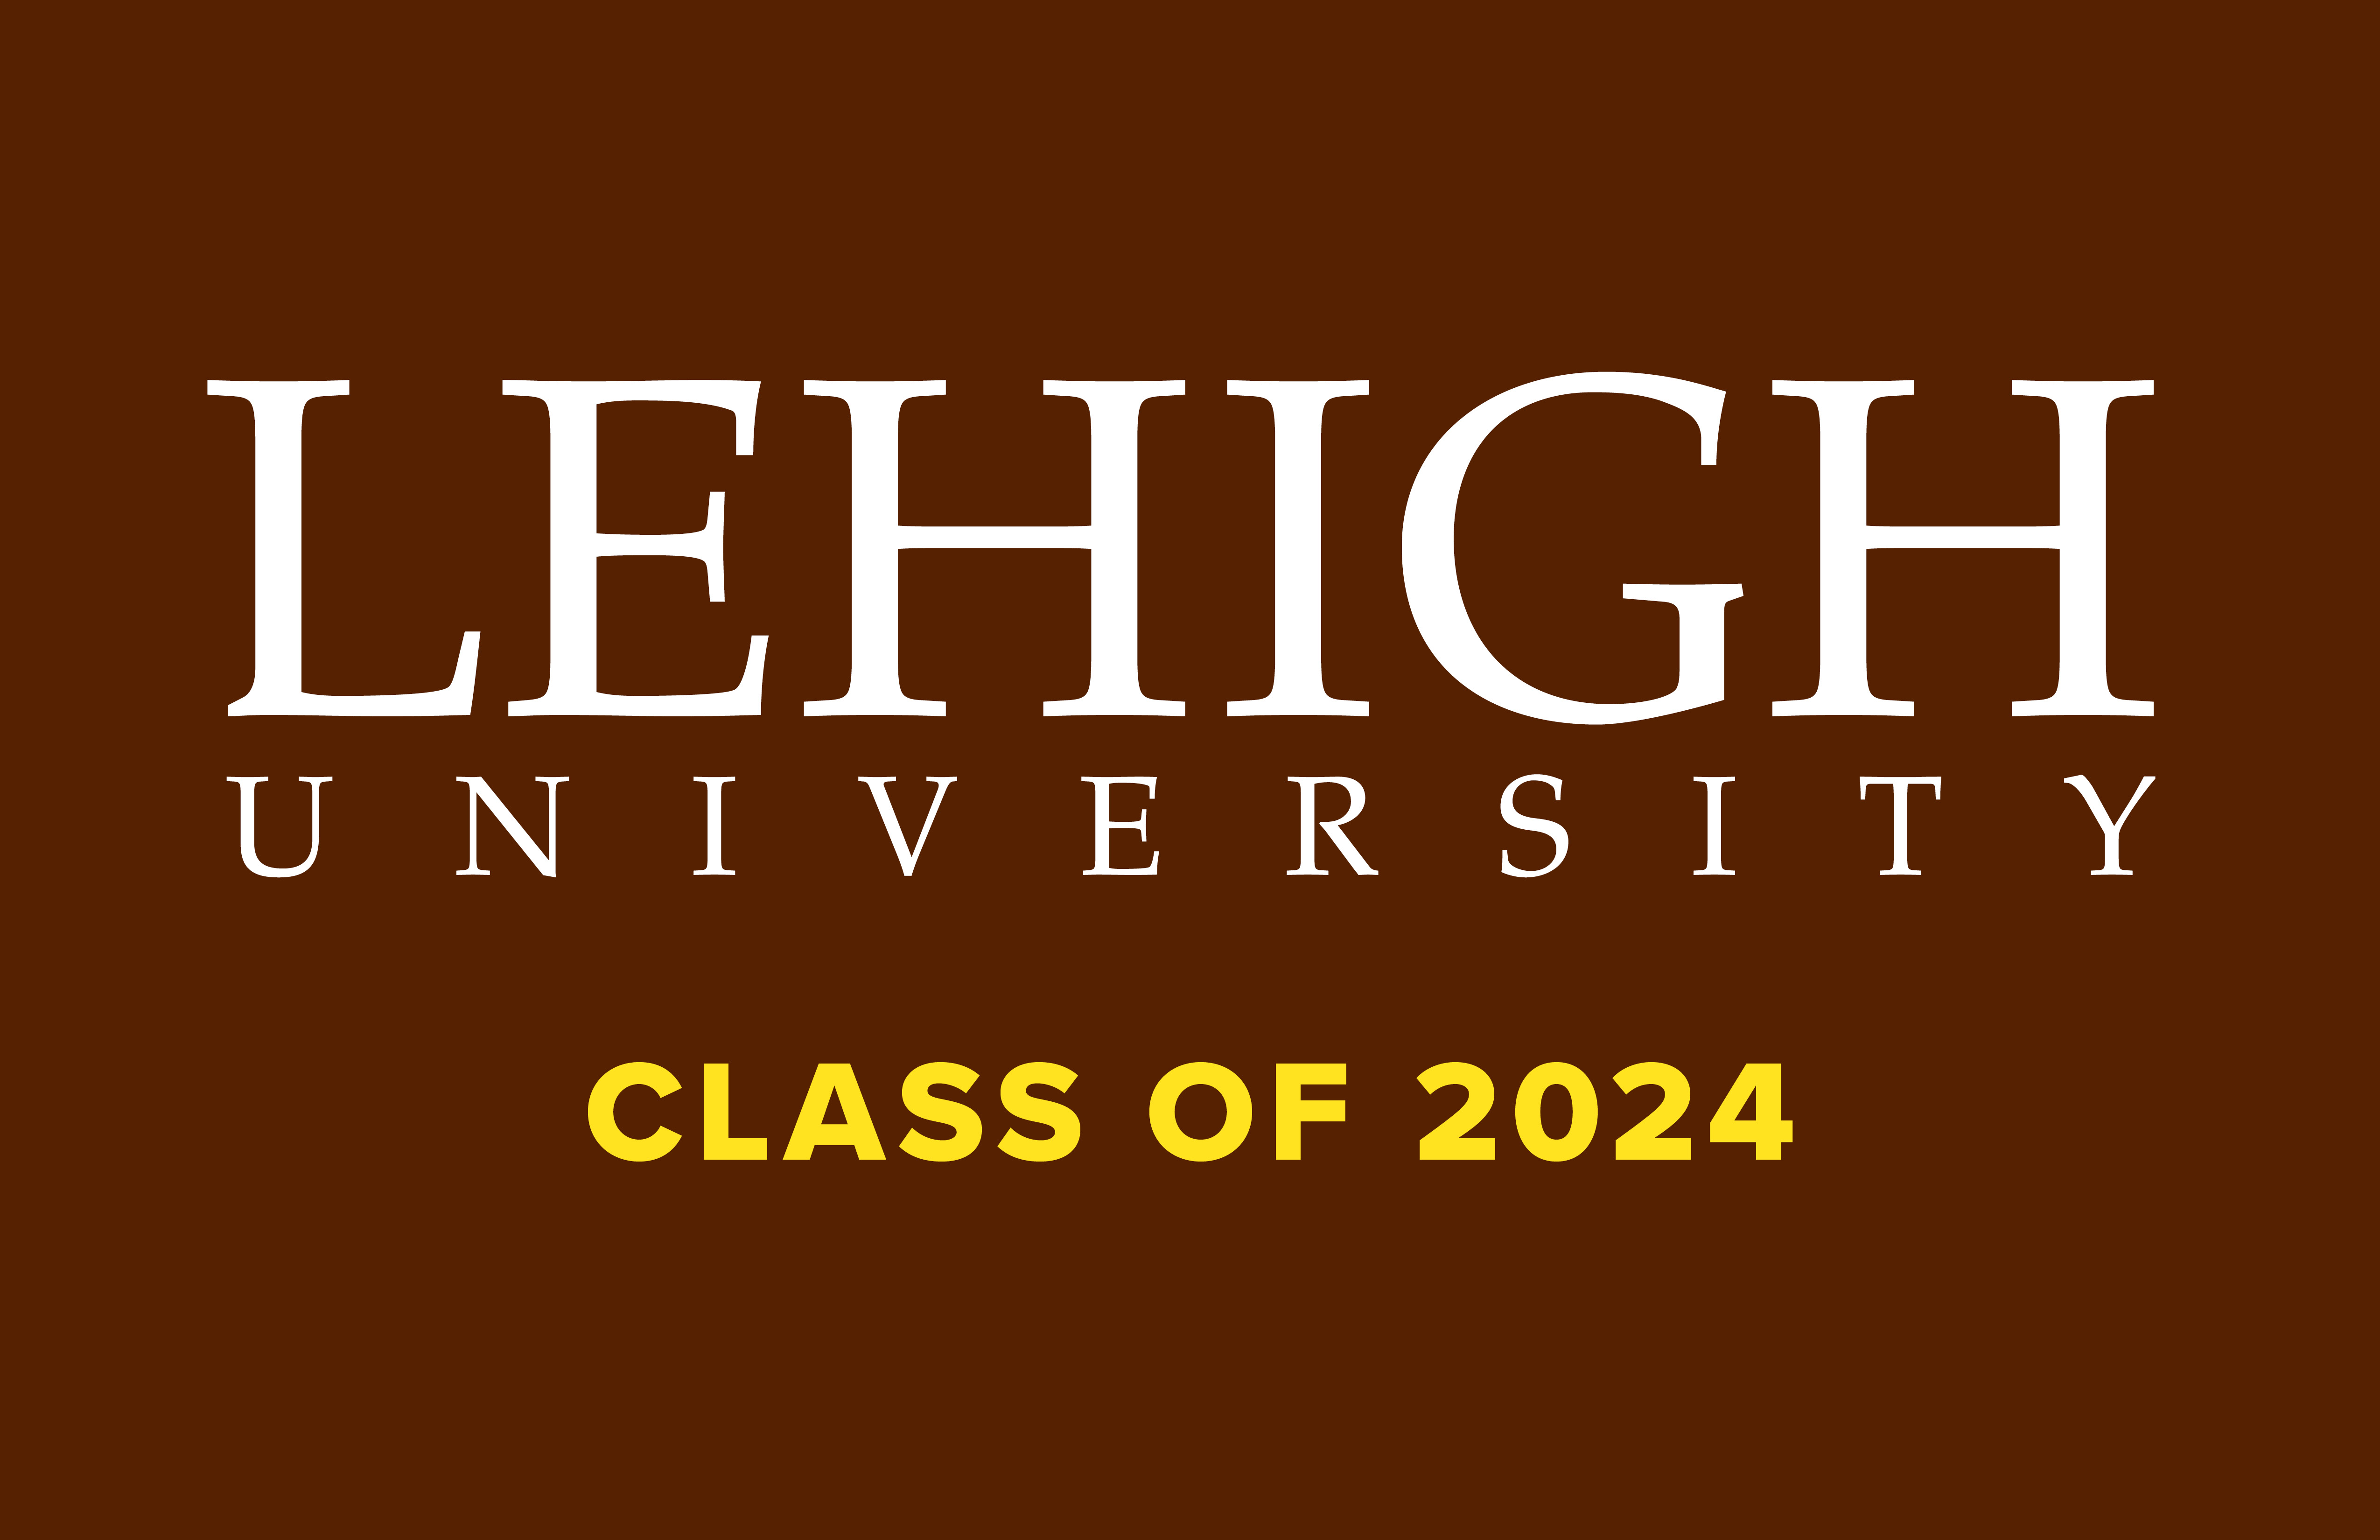 11x17 Class of 2024 Lawn sign #2